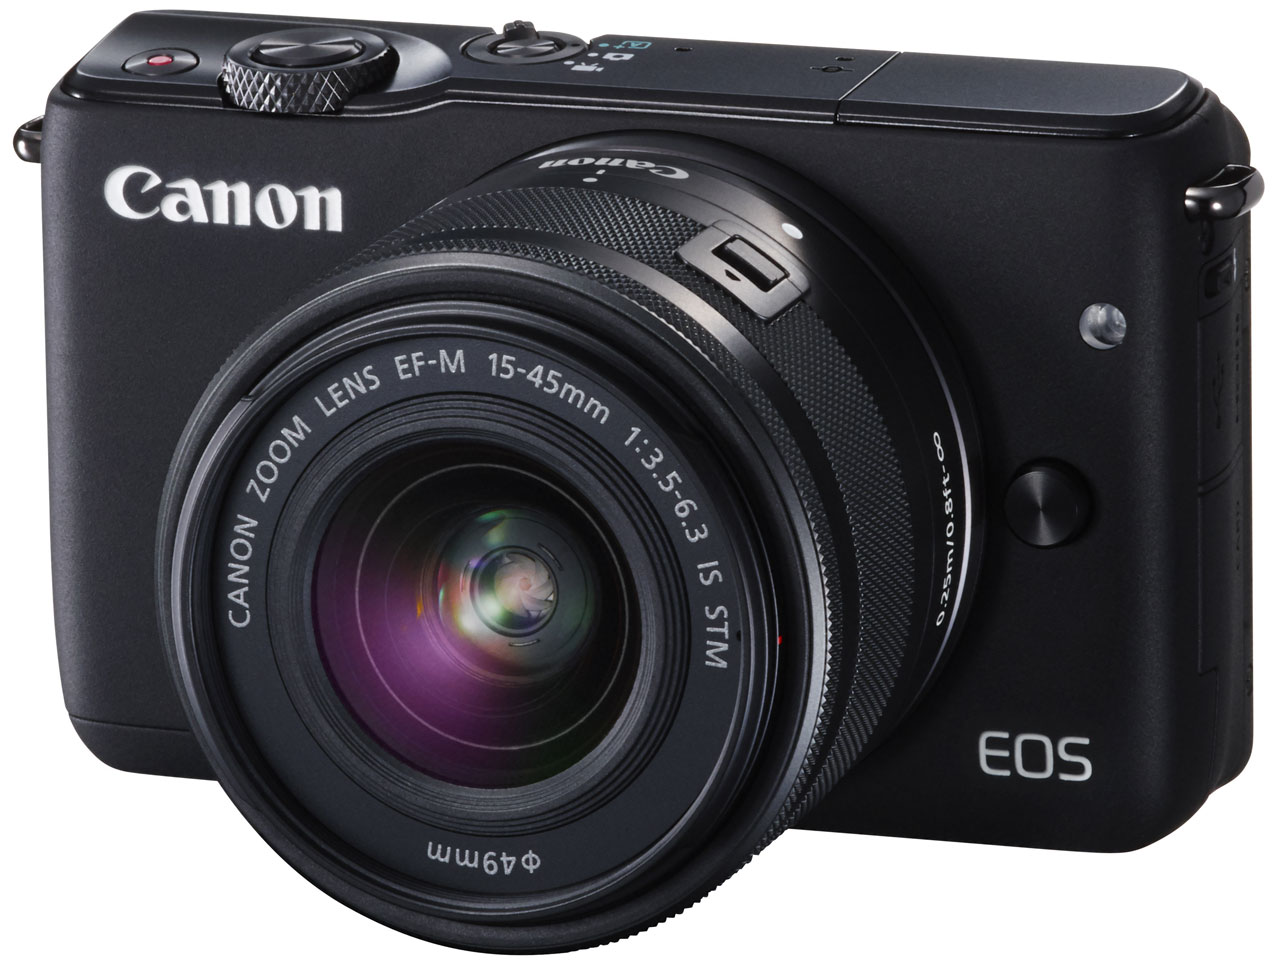 Canon EOS M10 EF-M15-45 IS STM Kit